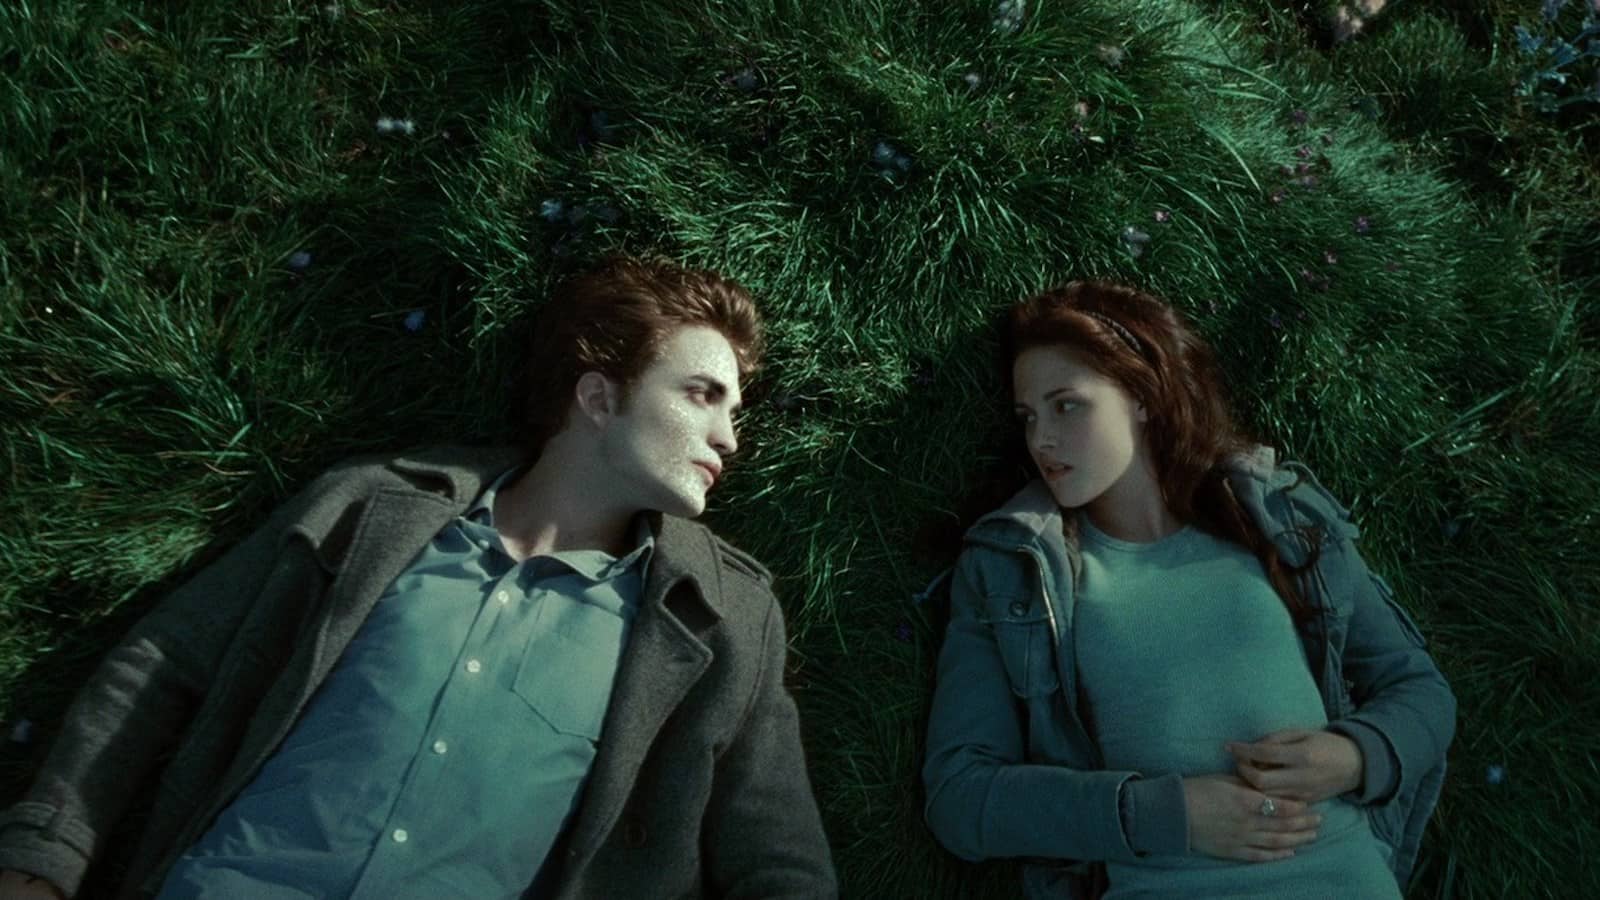 Two vampiric looking teens stare longingly at each other on blue-green grass.